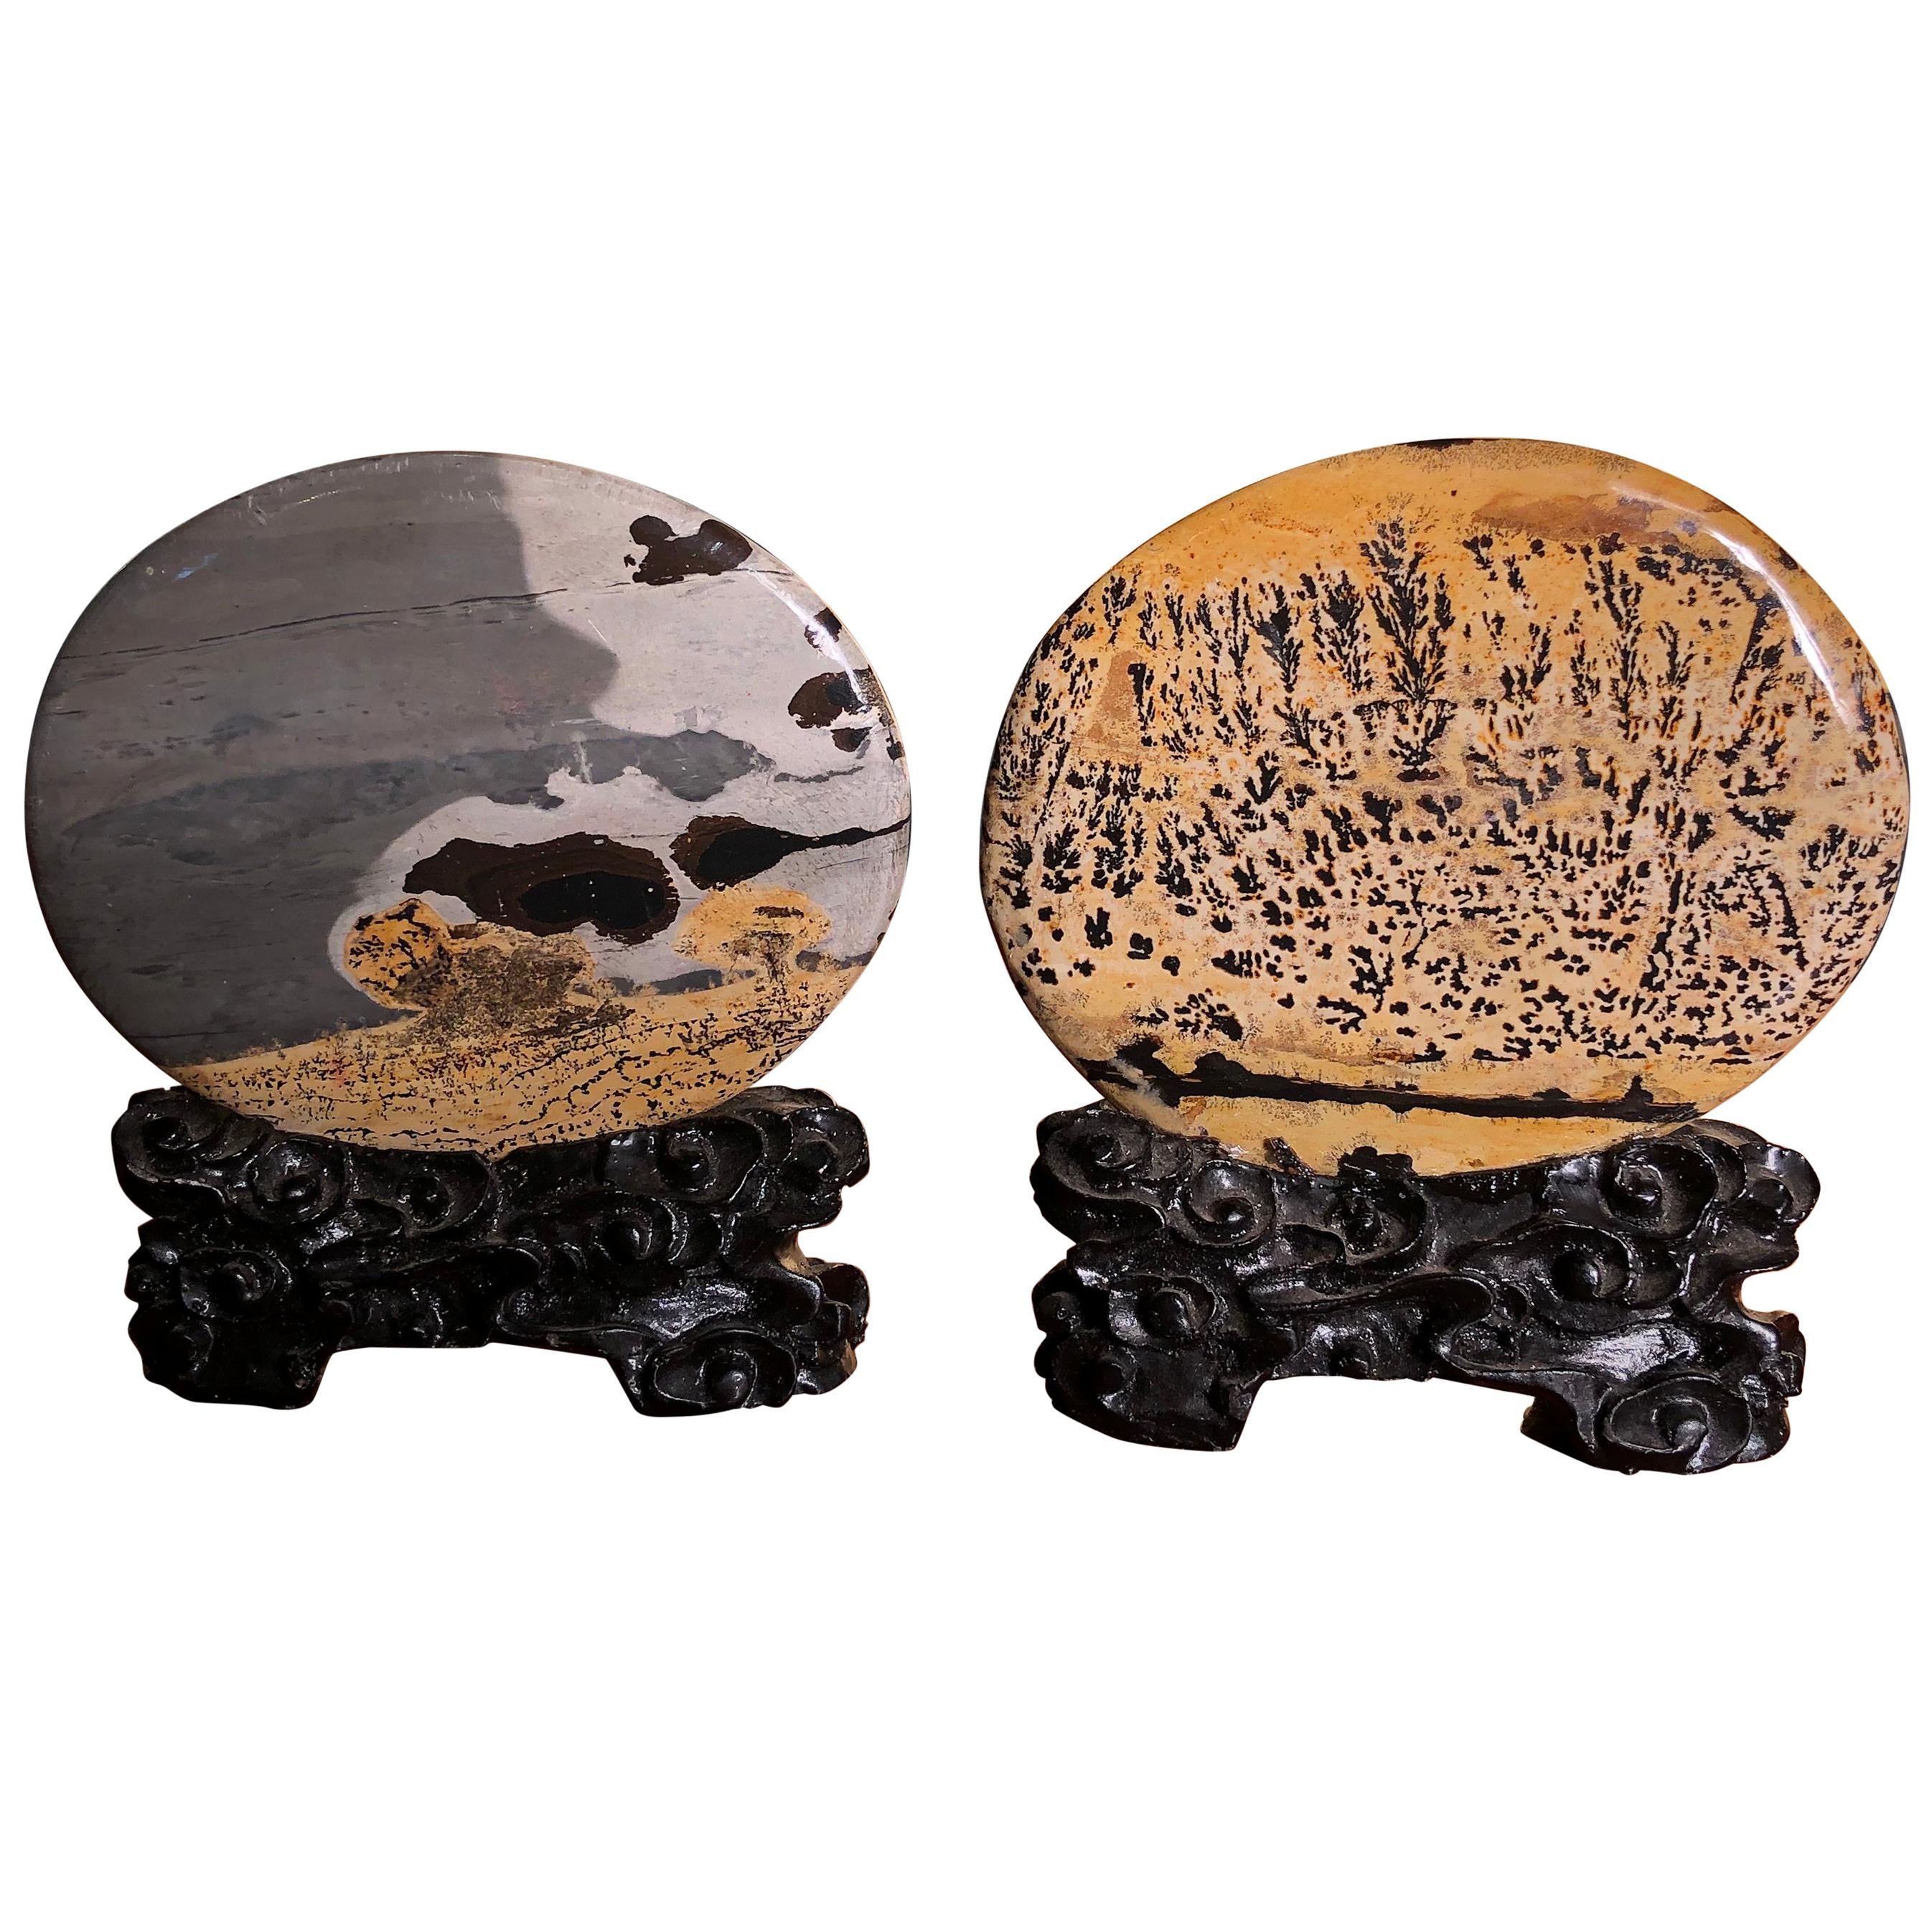 Lovely Pair Natural Viewing Stones, Collectors Work of Art